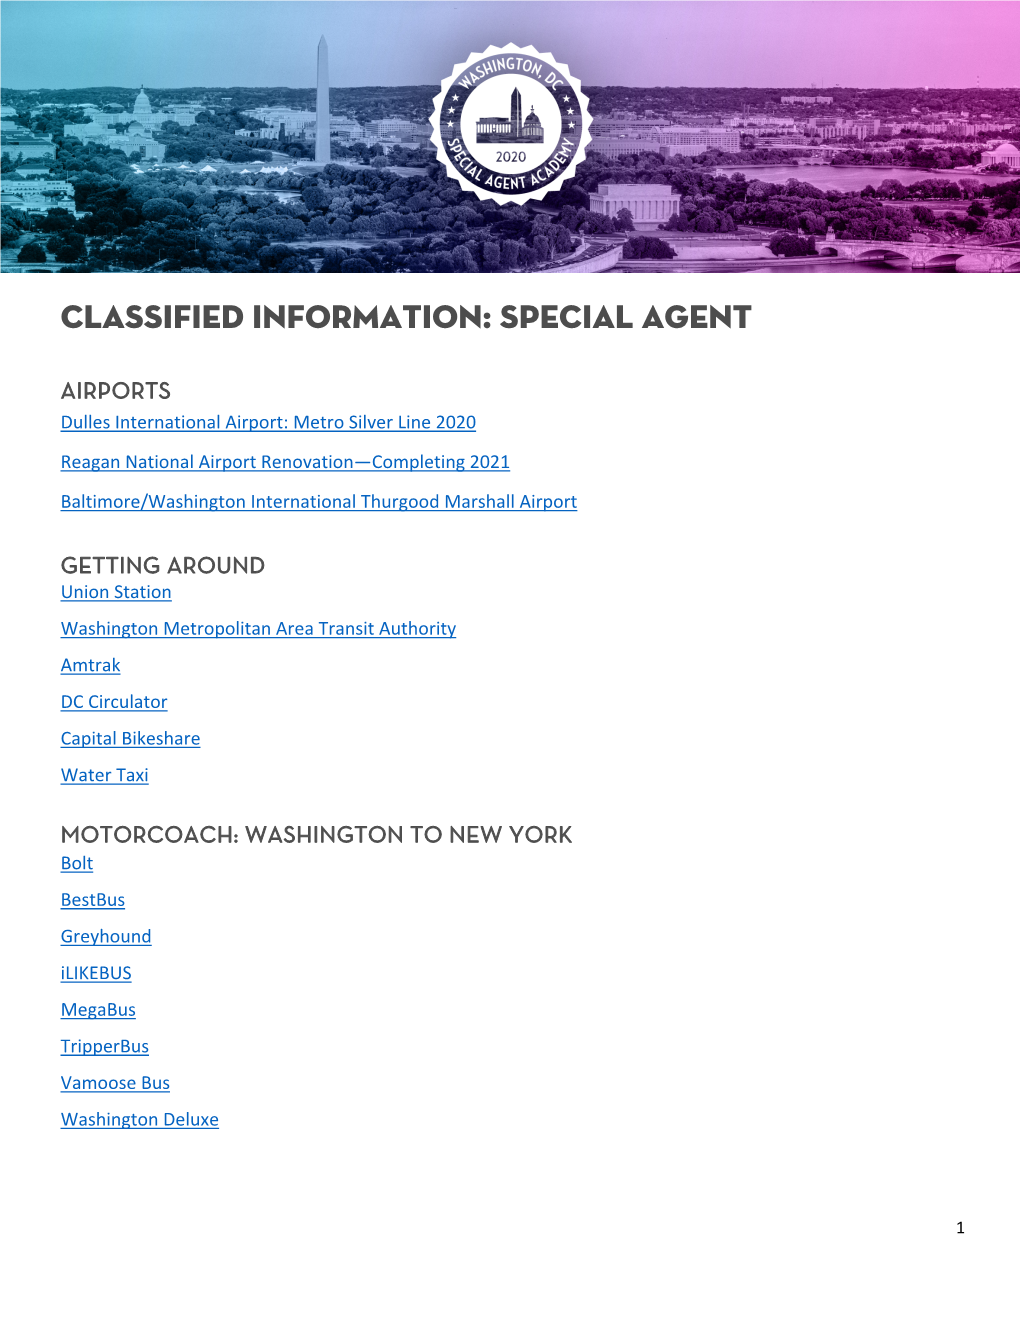 CLASSIFIED INFORMATION: Special Agent